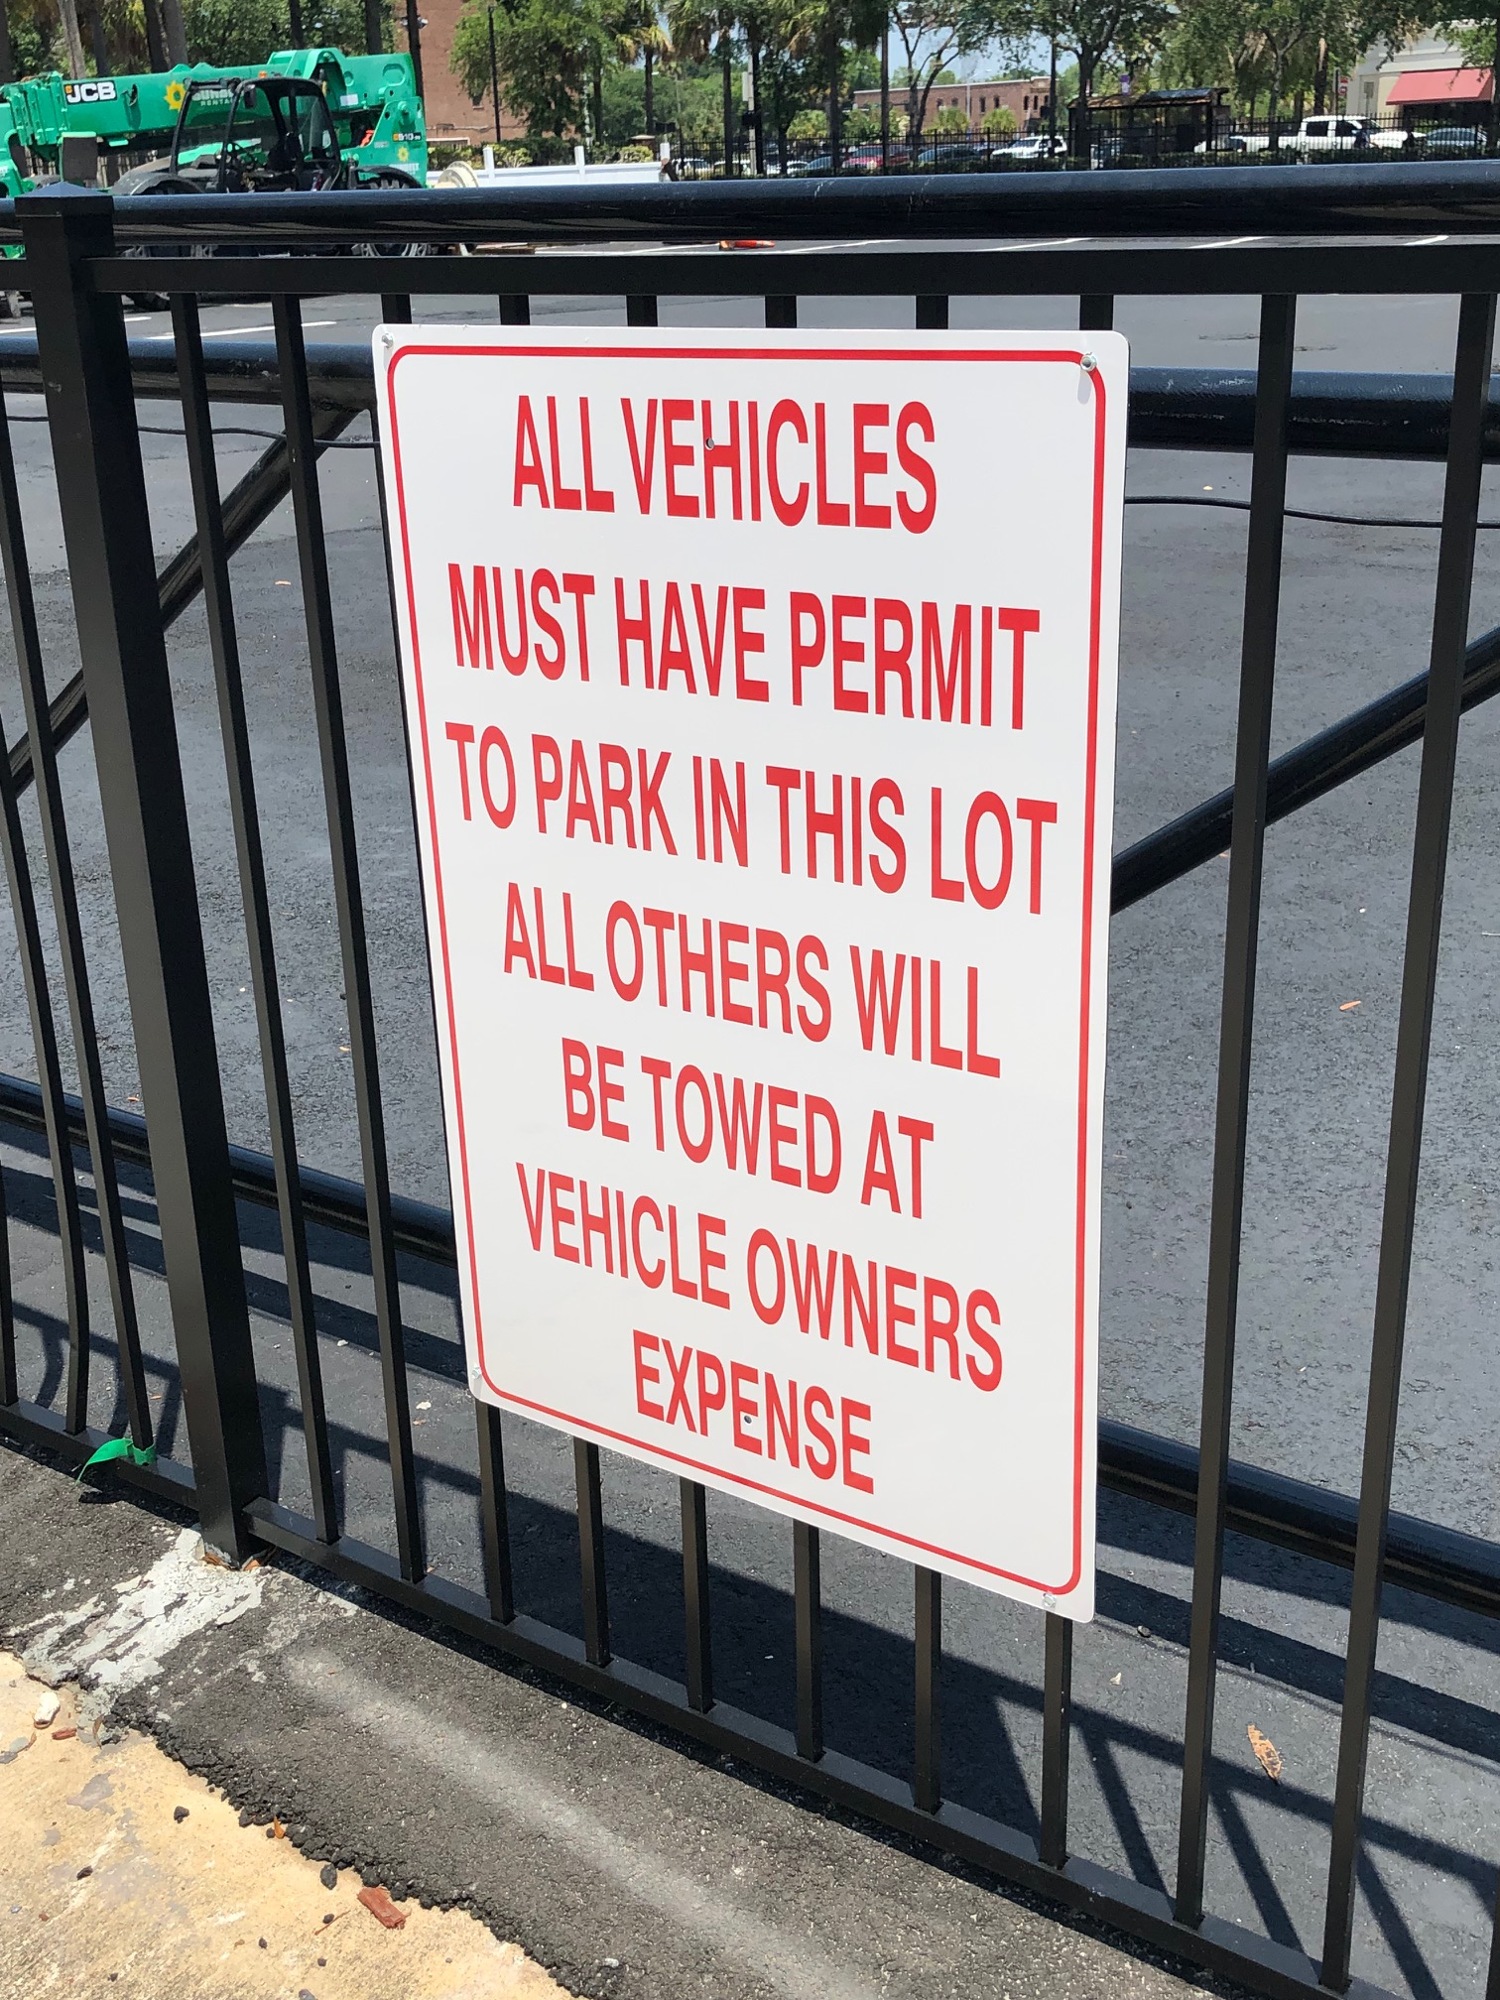 Signs at the empty lot warn that a permit is needed to park there.